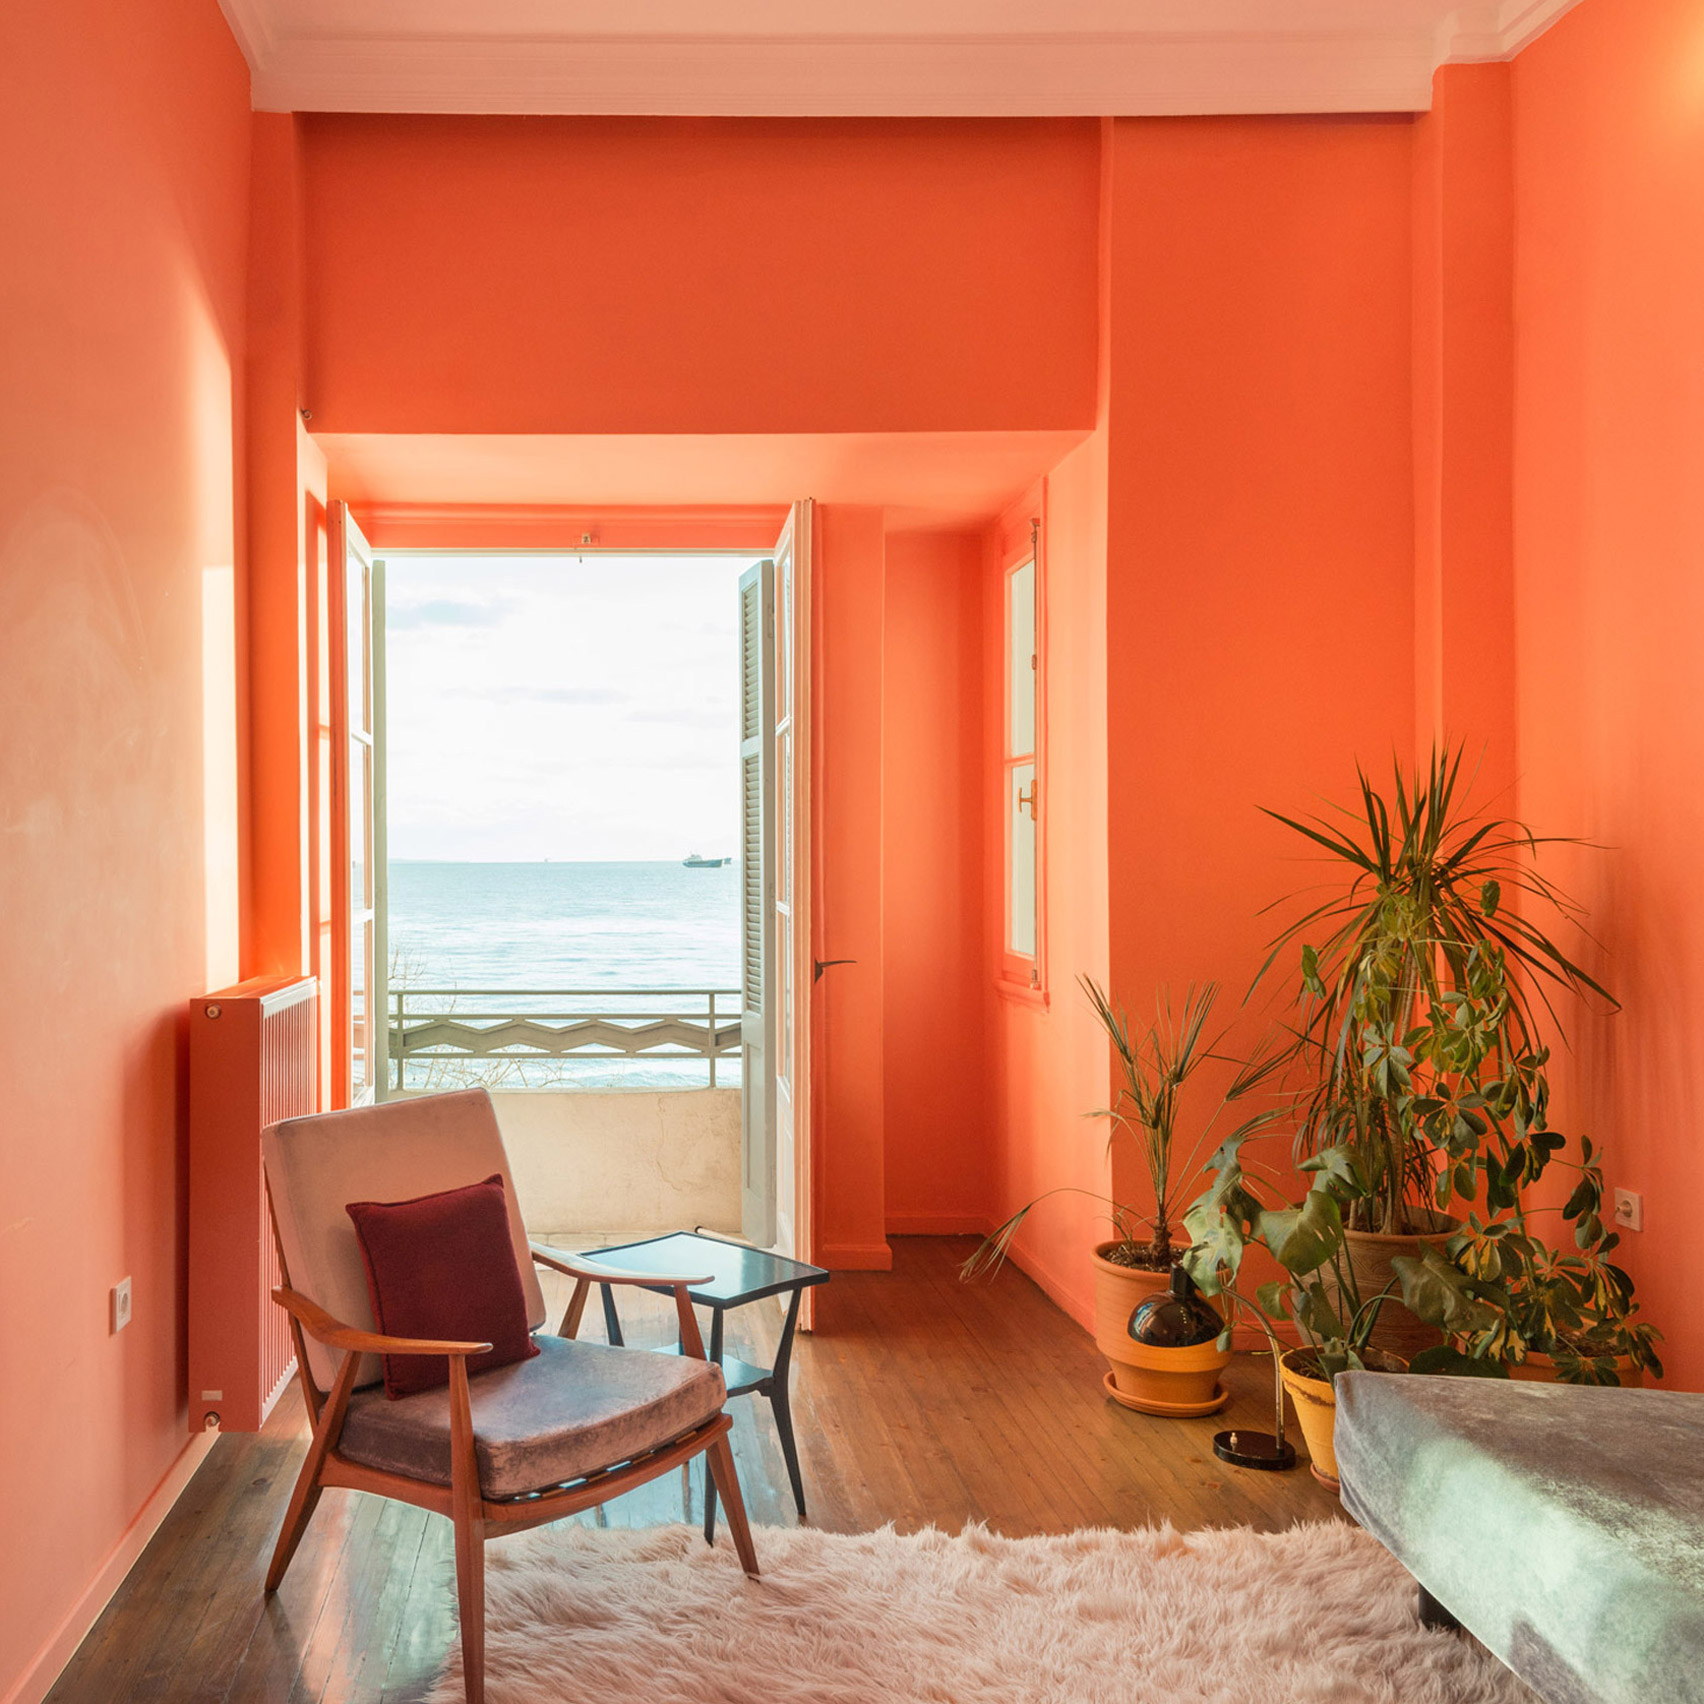 The best coral interiors: Waterfront Nikis apartment by Stamatios Giannikis